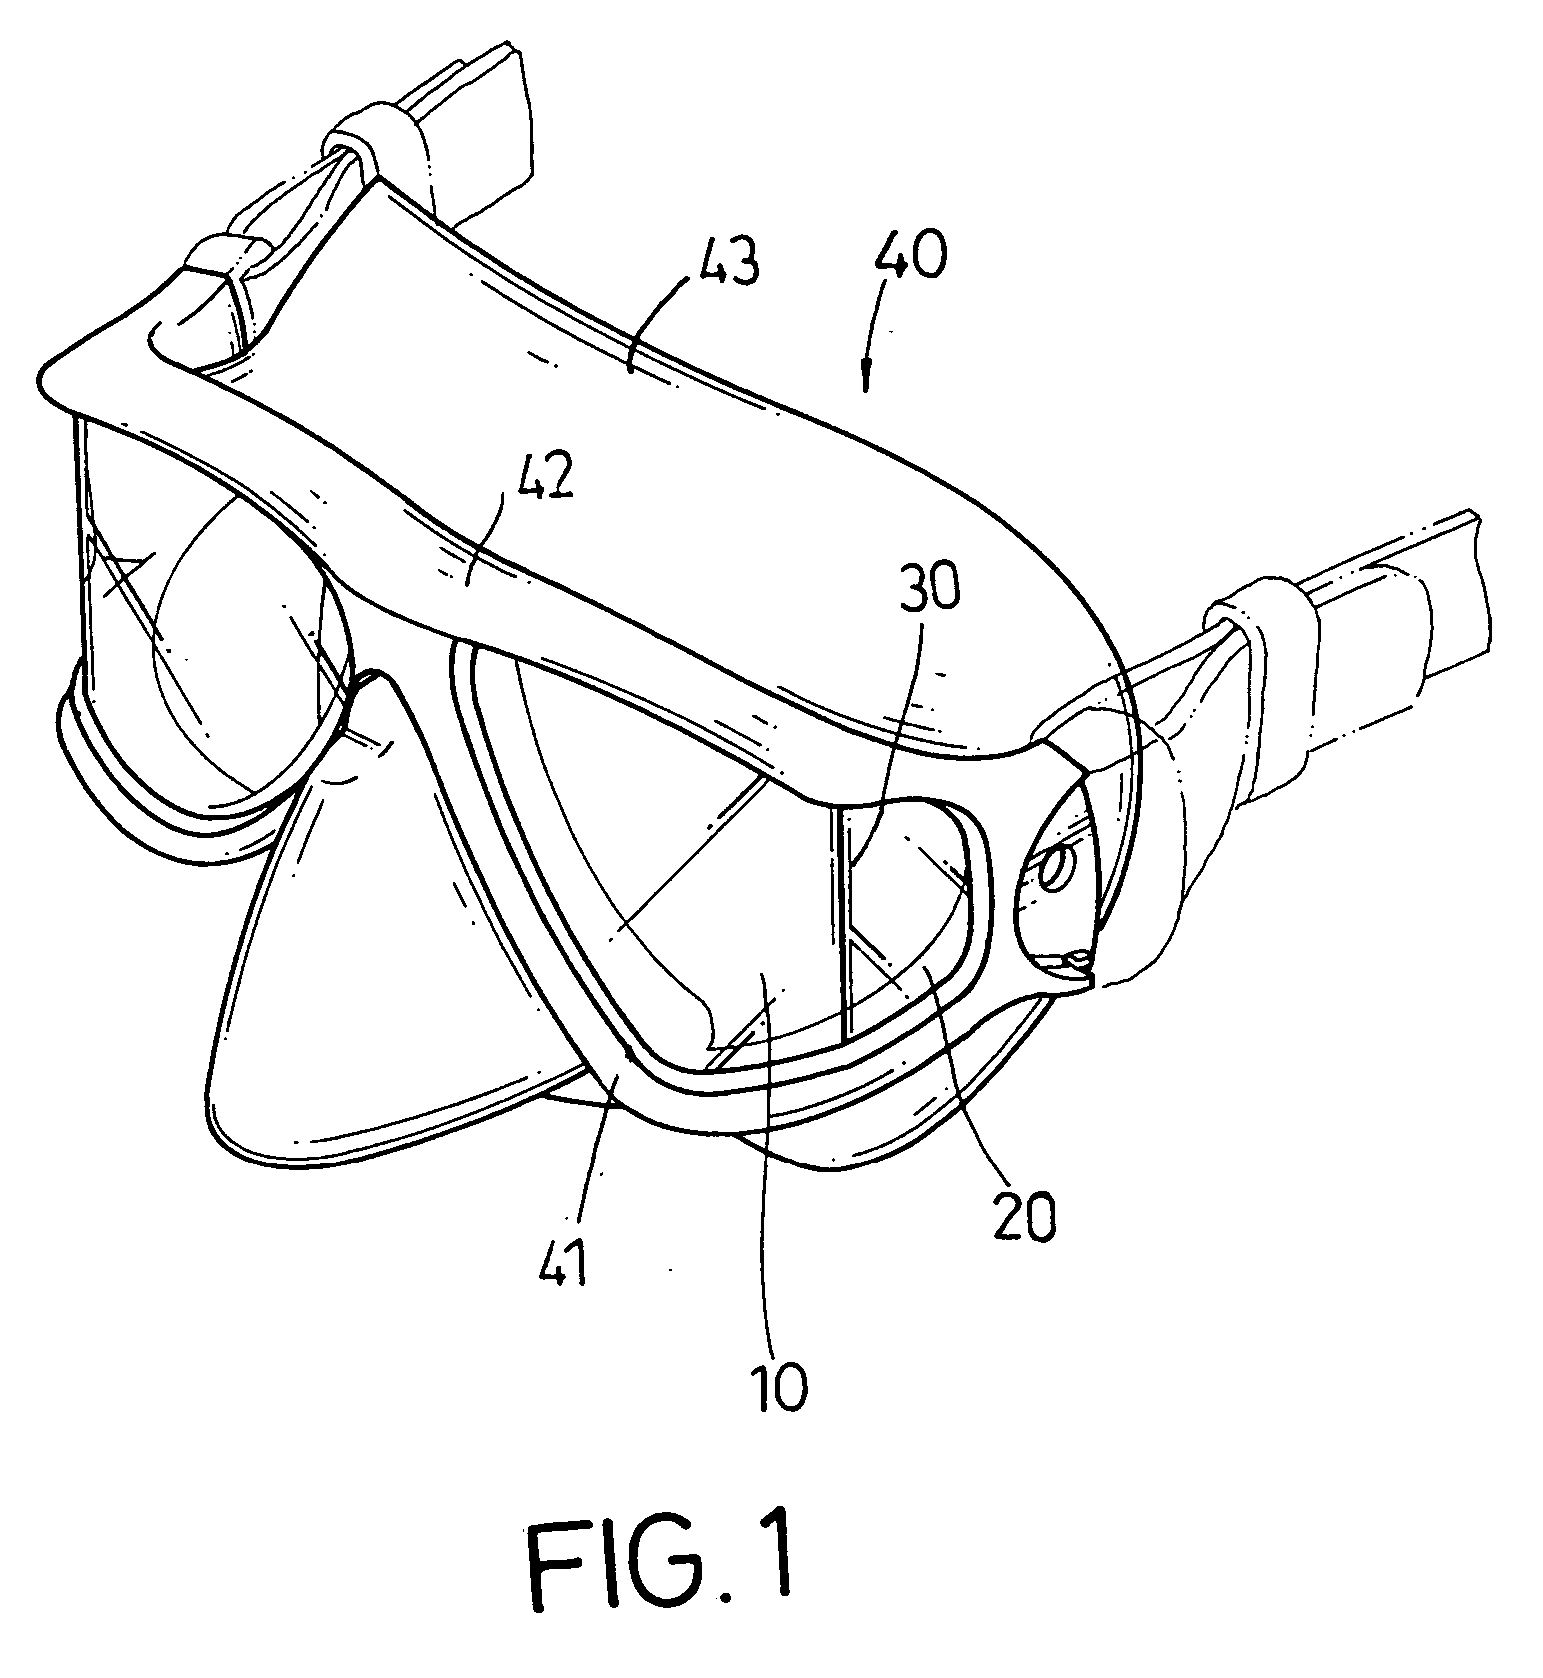 Protective lenses with a flexible gasket assembly